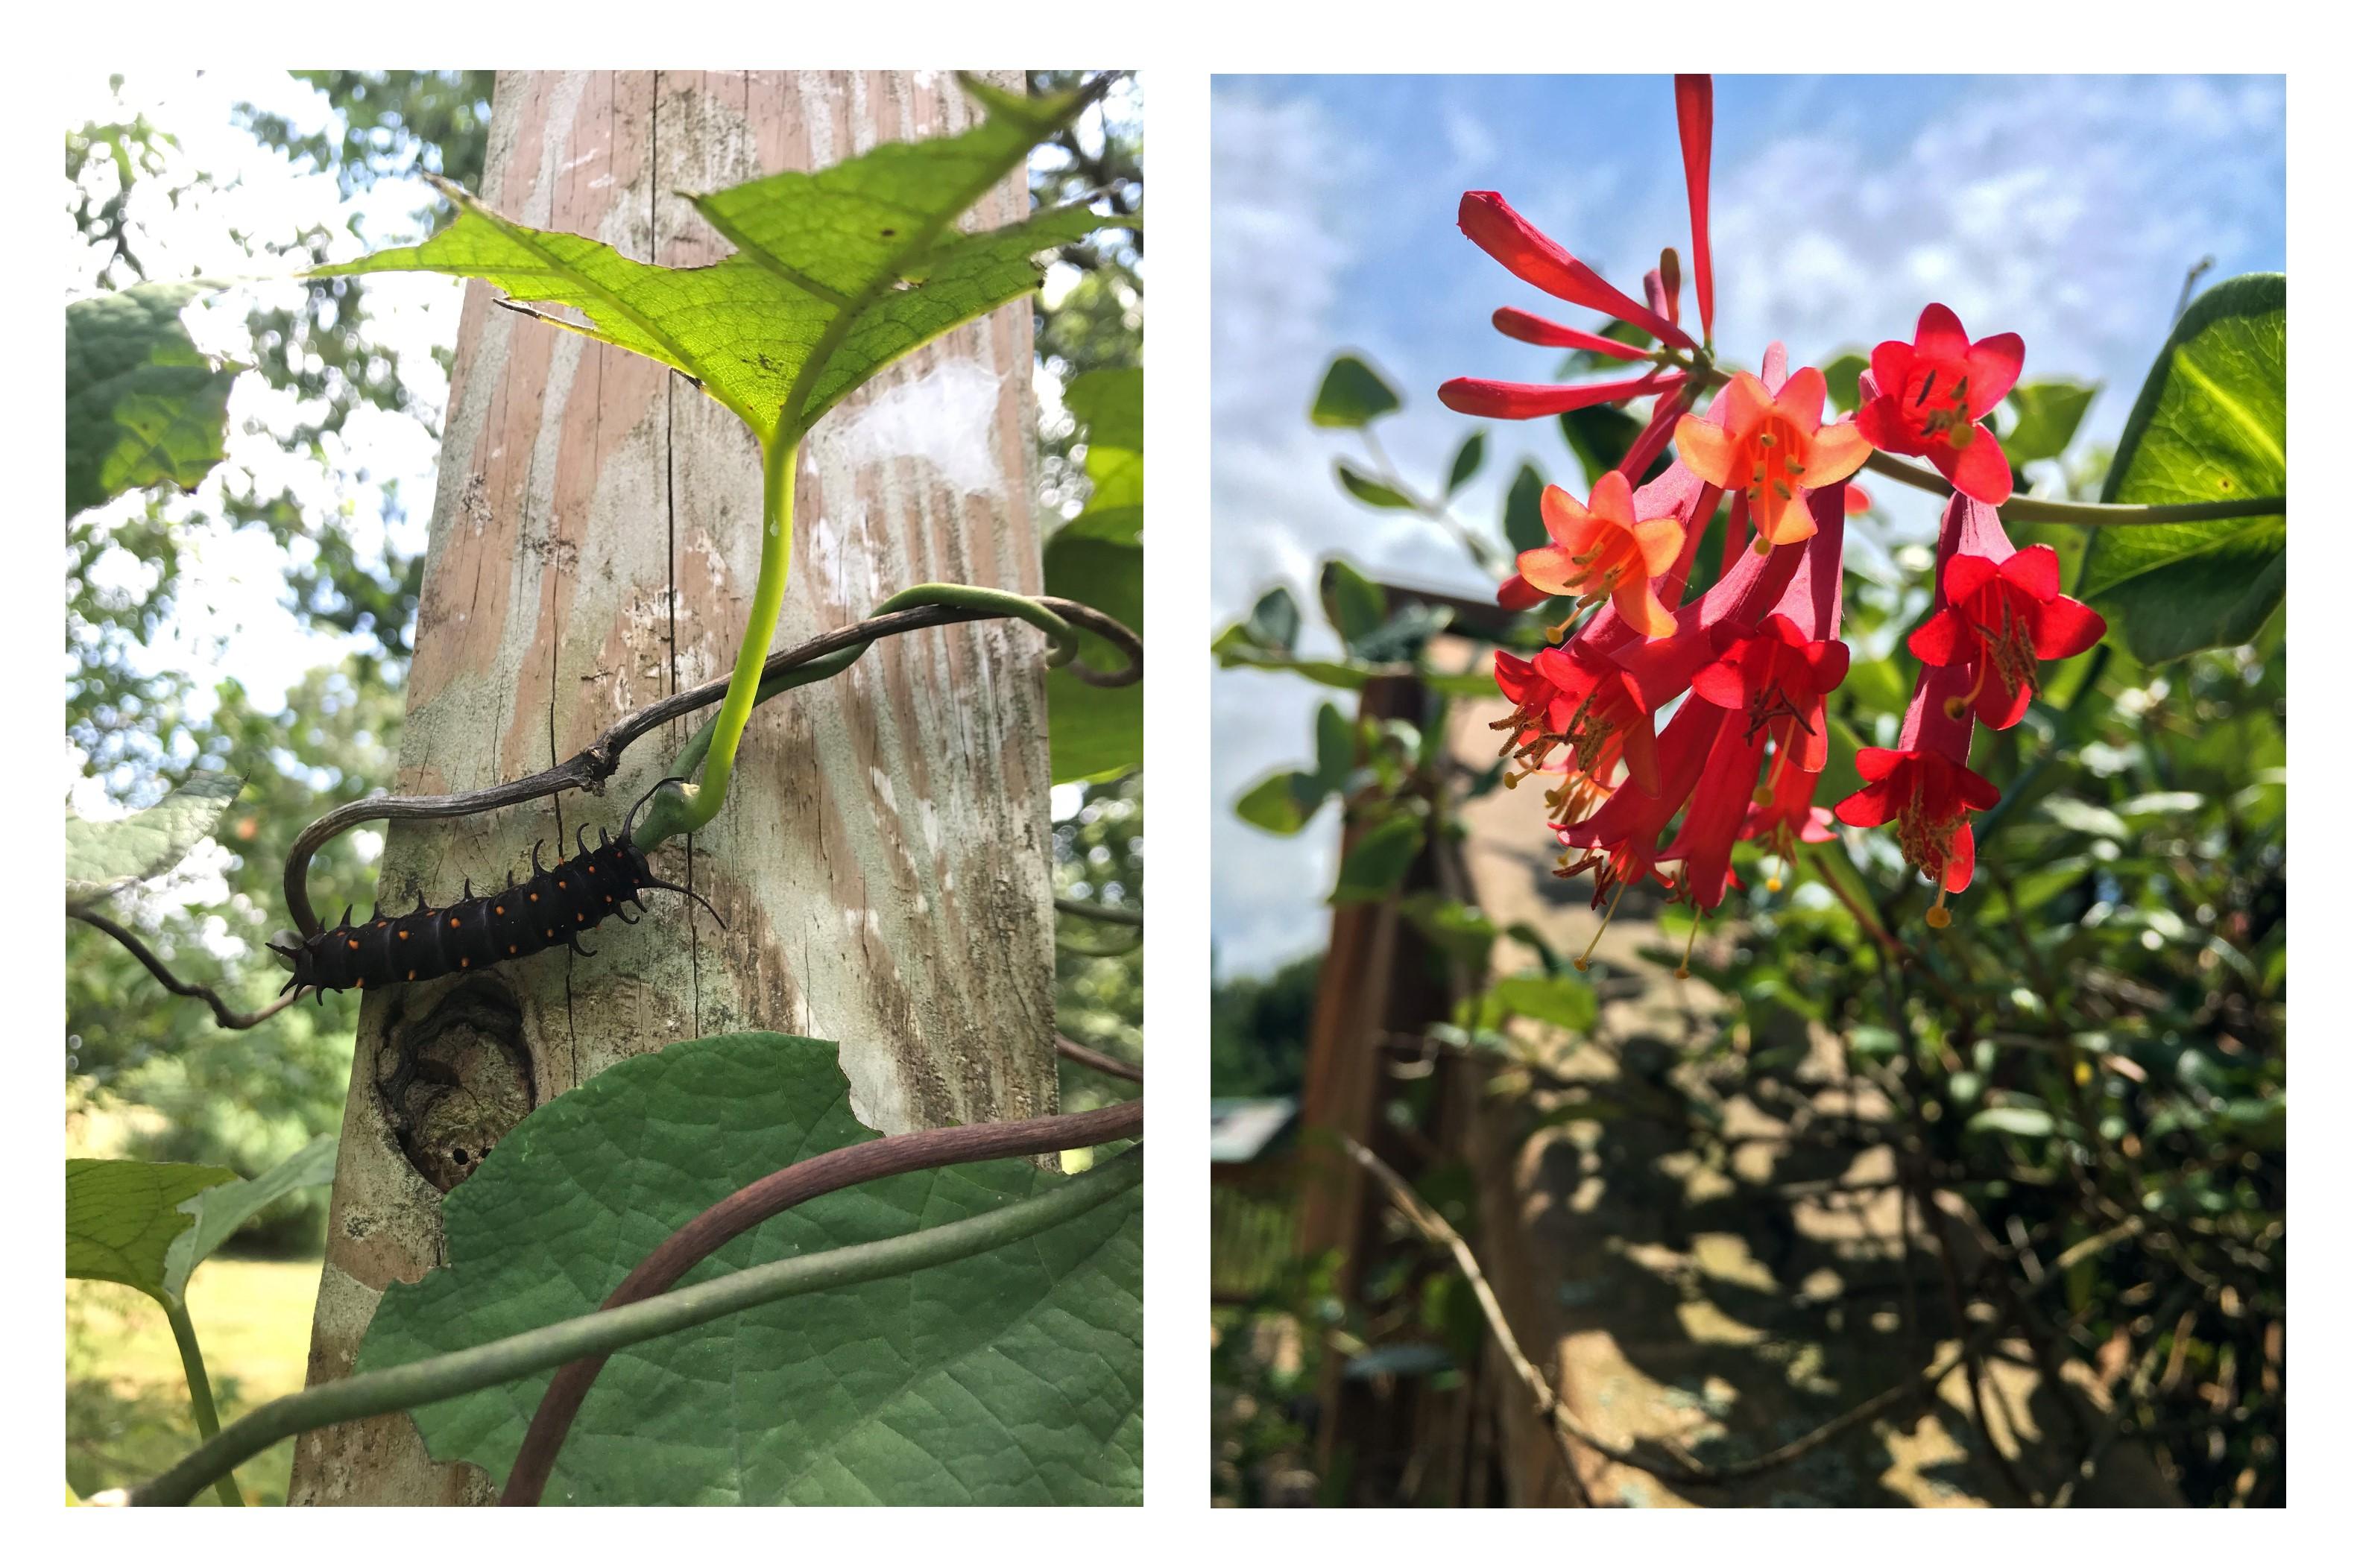 From left to right: Pipevine swallowtail caterpillar on Dutchman’s pipe (Aristolochia macrophylla), trumpet honeysuckle (Lonicera sempervirens) on the Mississippi Embayment bridge